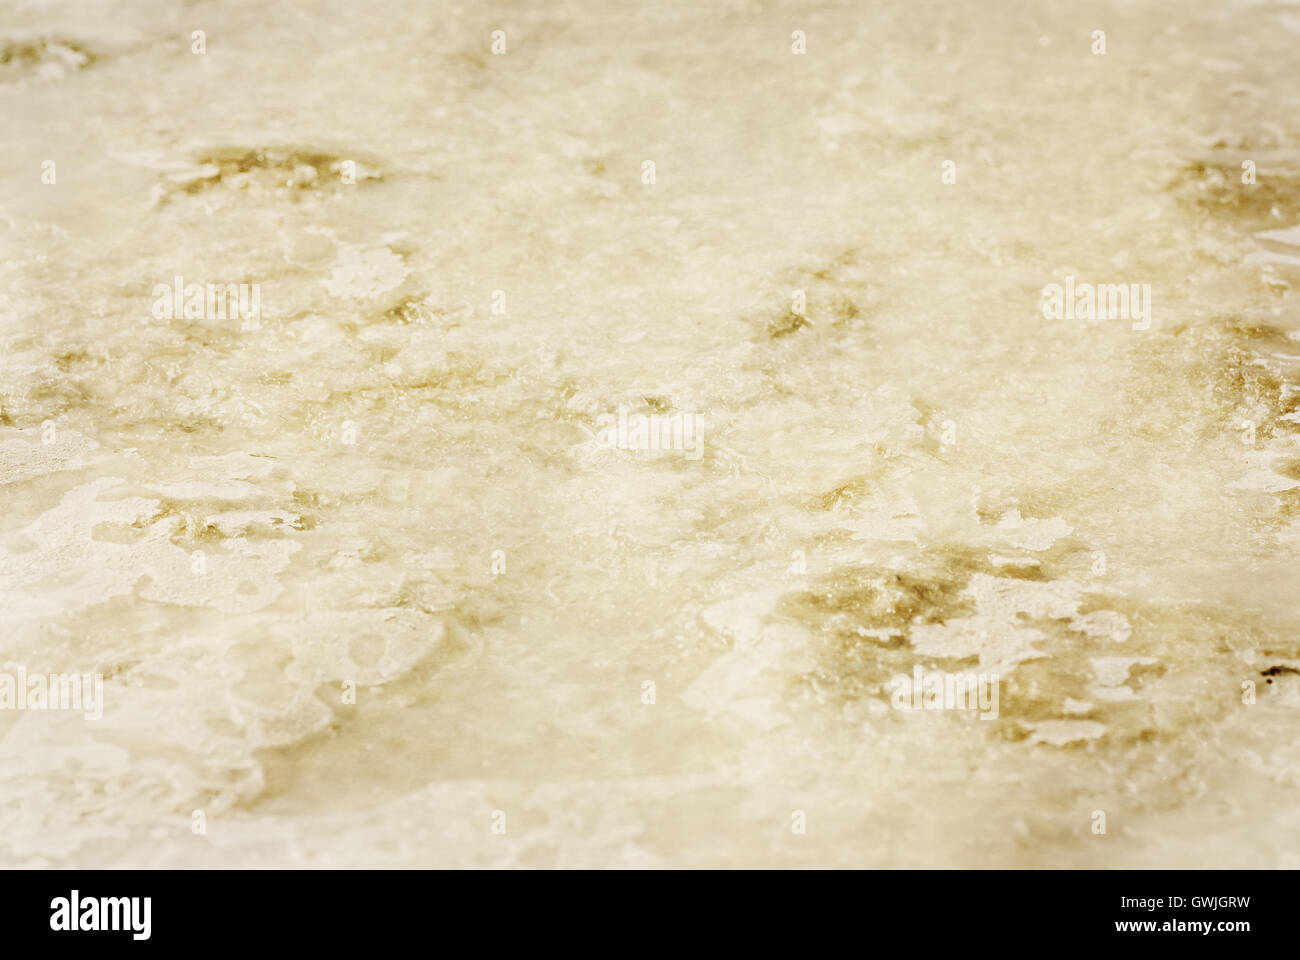 Yellow color abstract grunge texture background Stock Photo